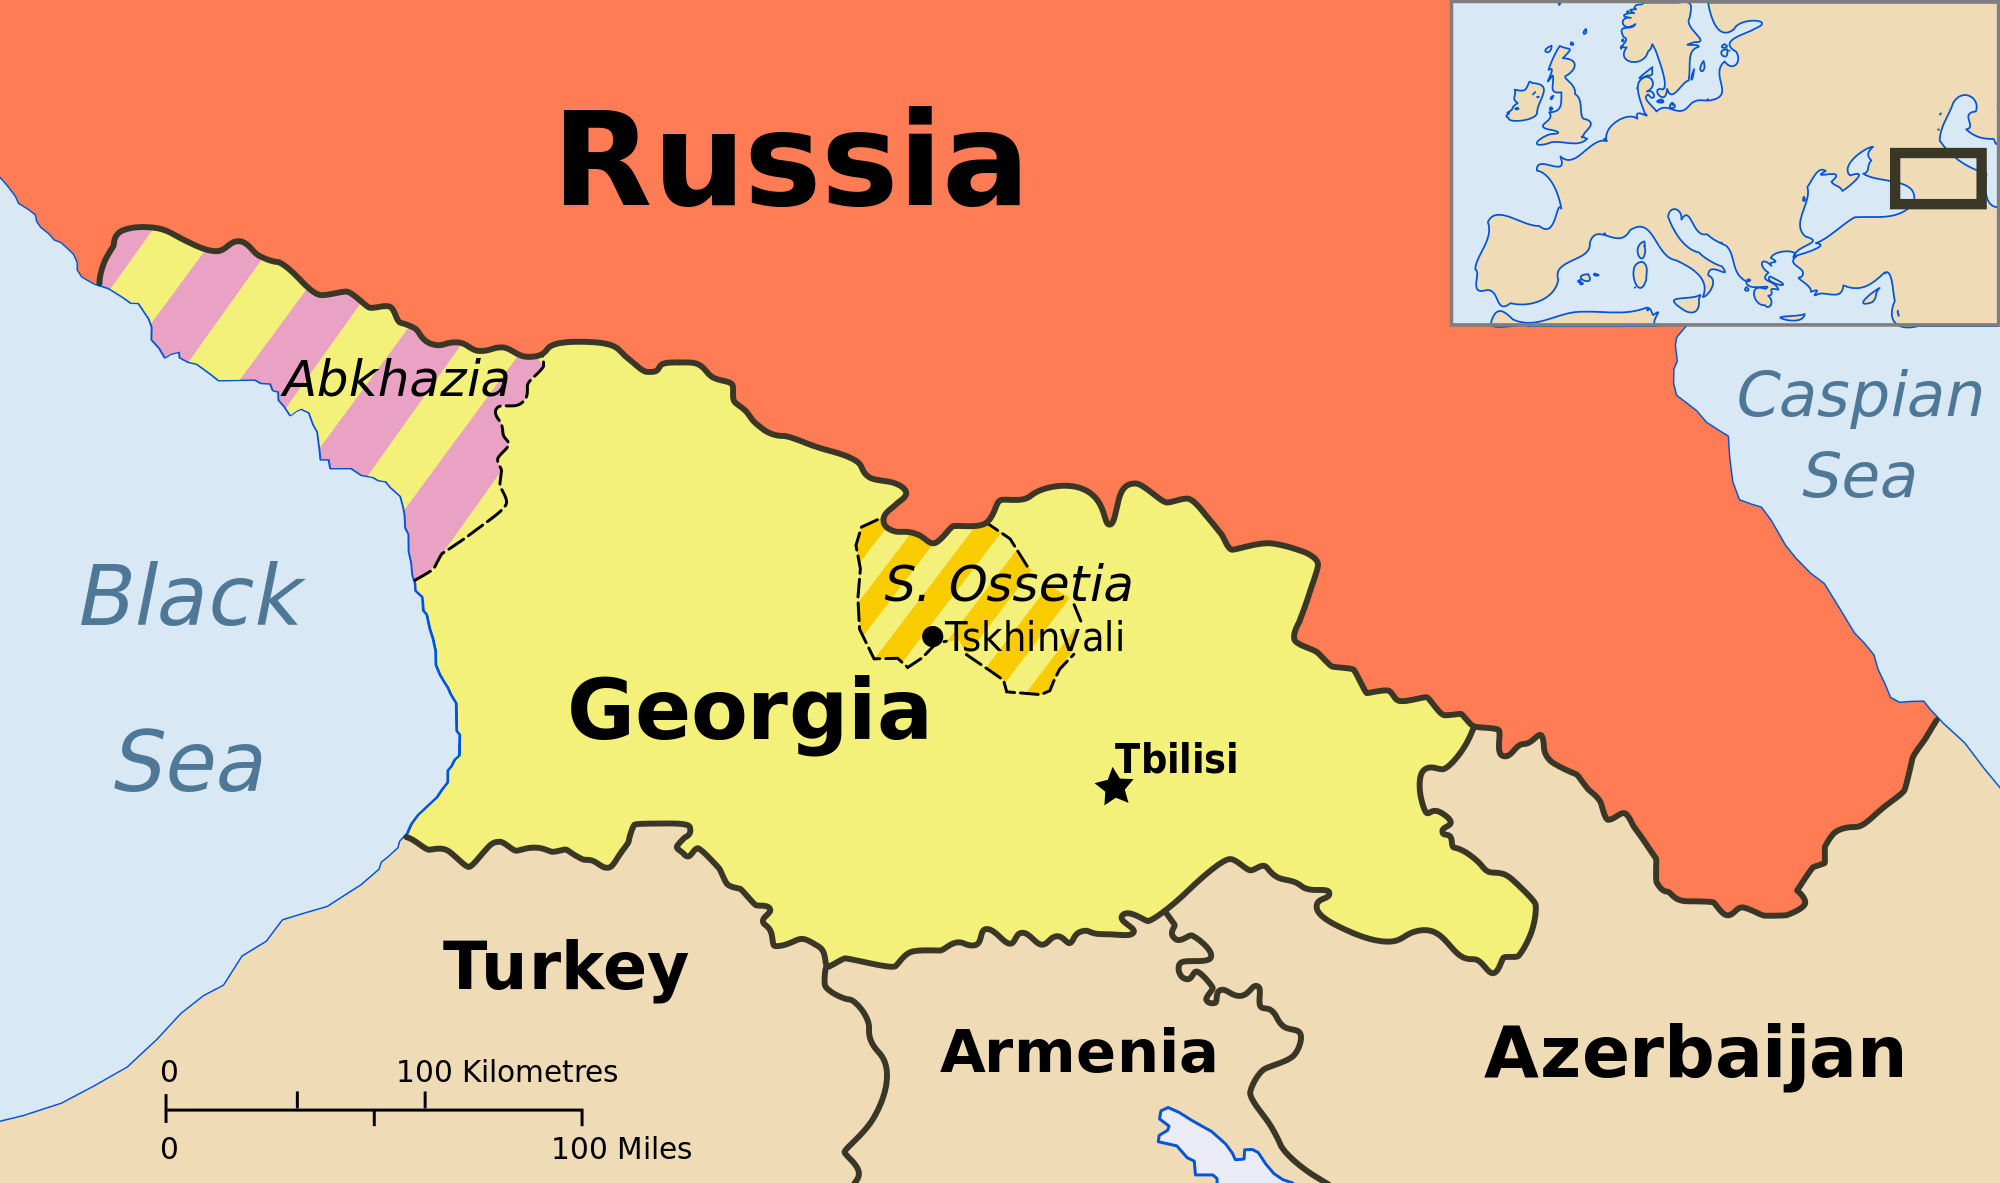 Russia already controls two puppet states on occupied Georgian territory